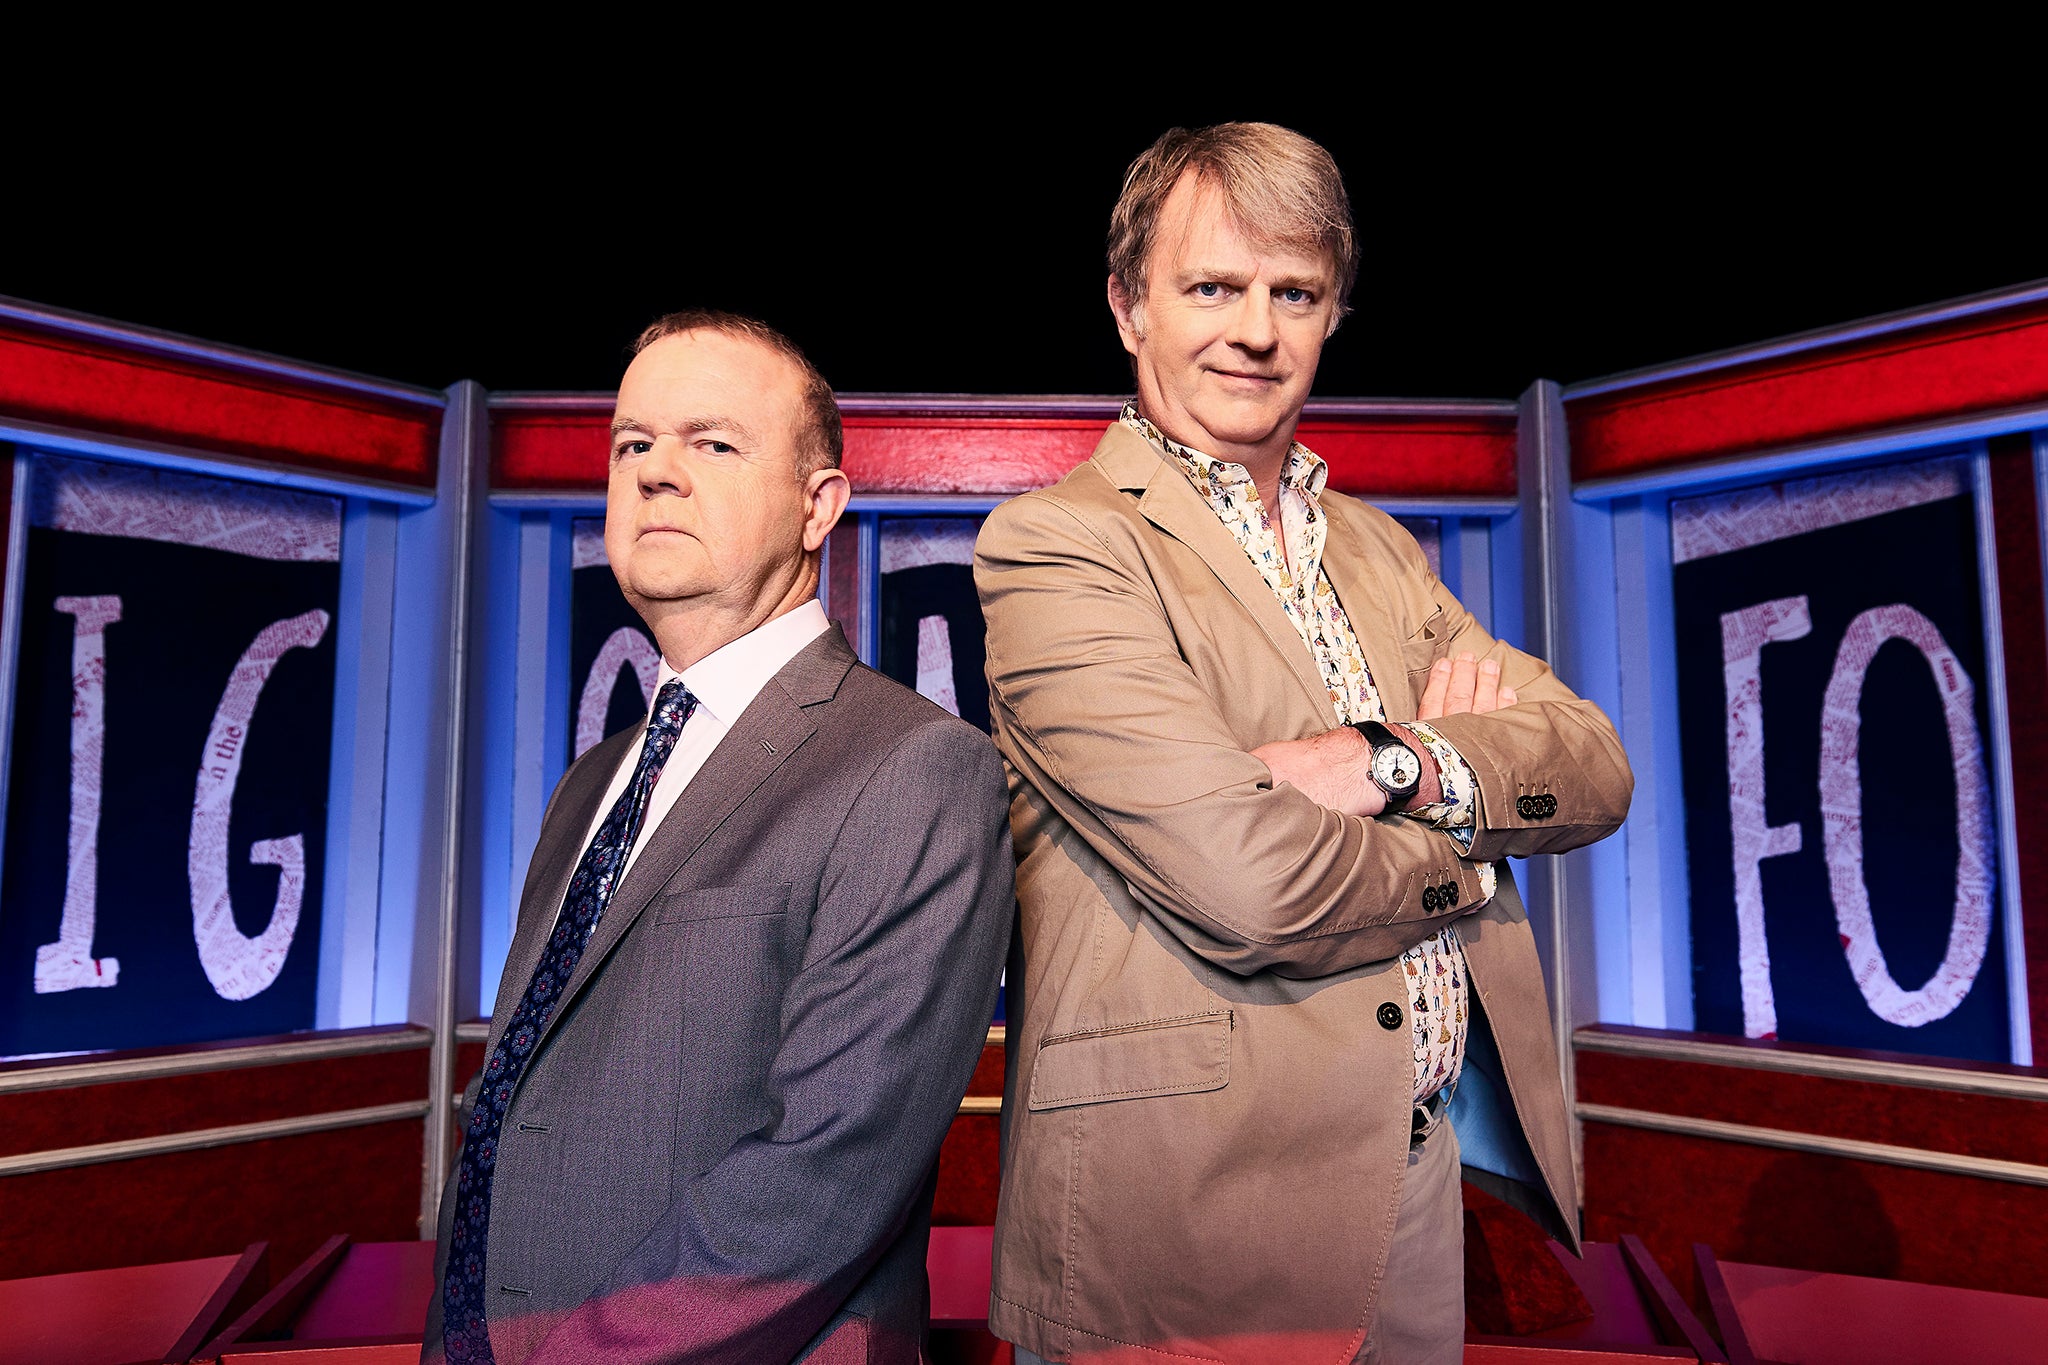 Ian Hislop and Paul Merton return with HIGNFY